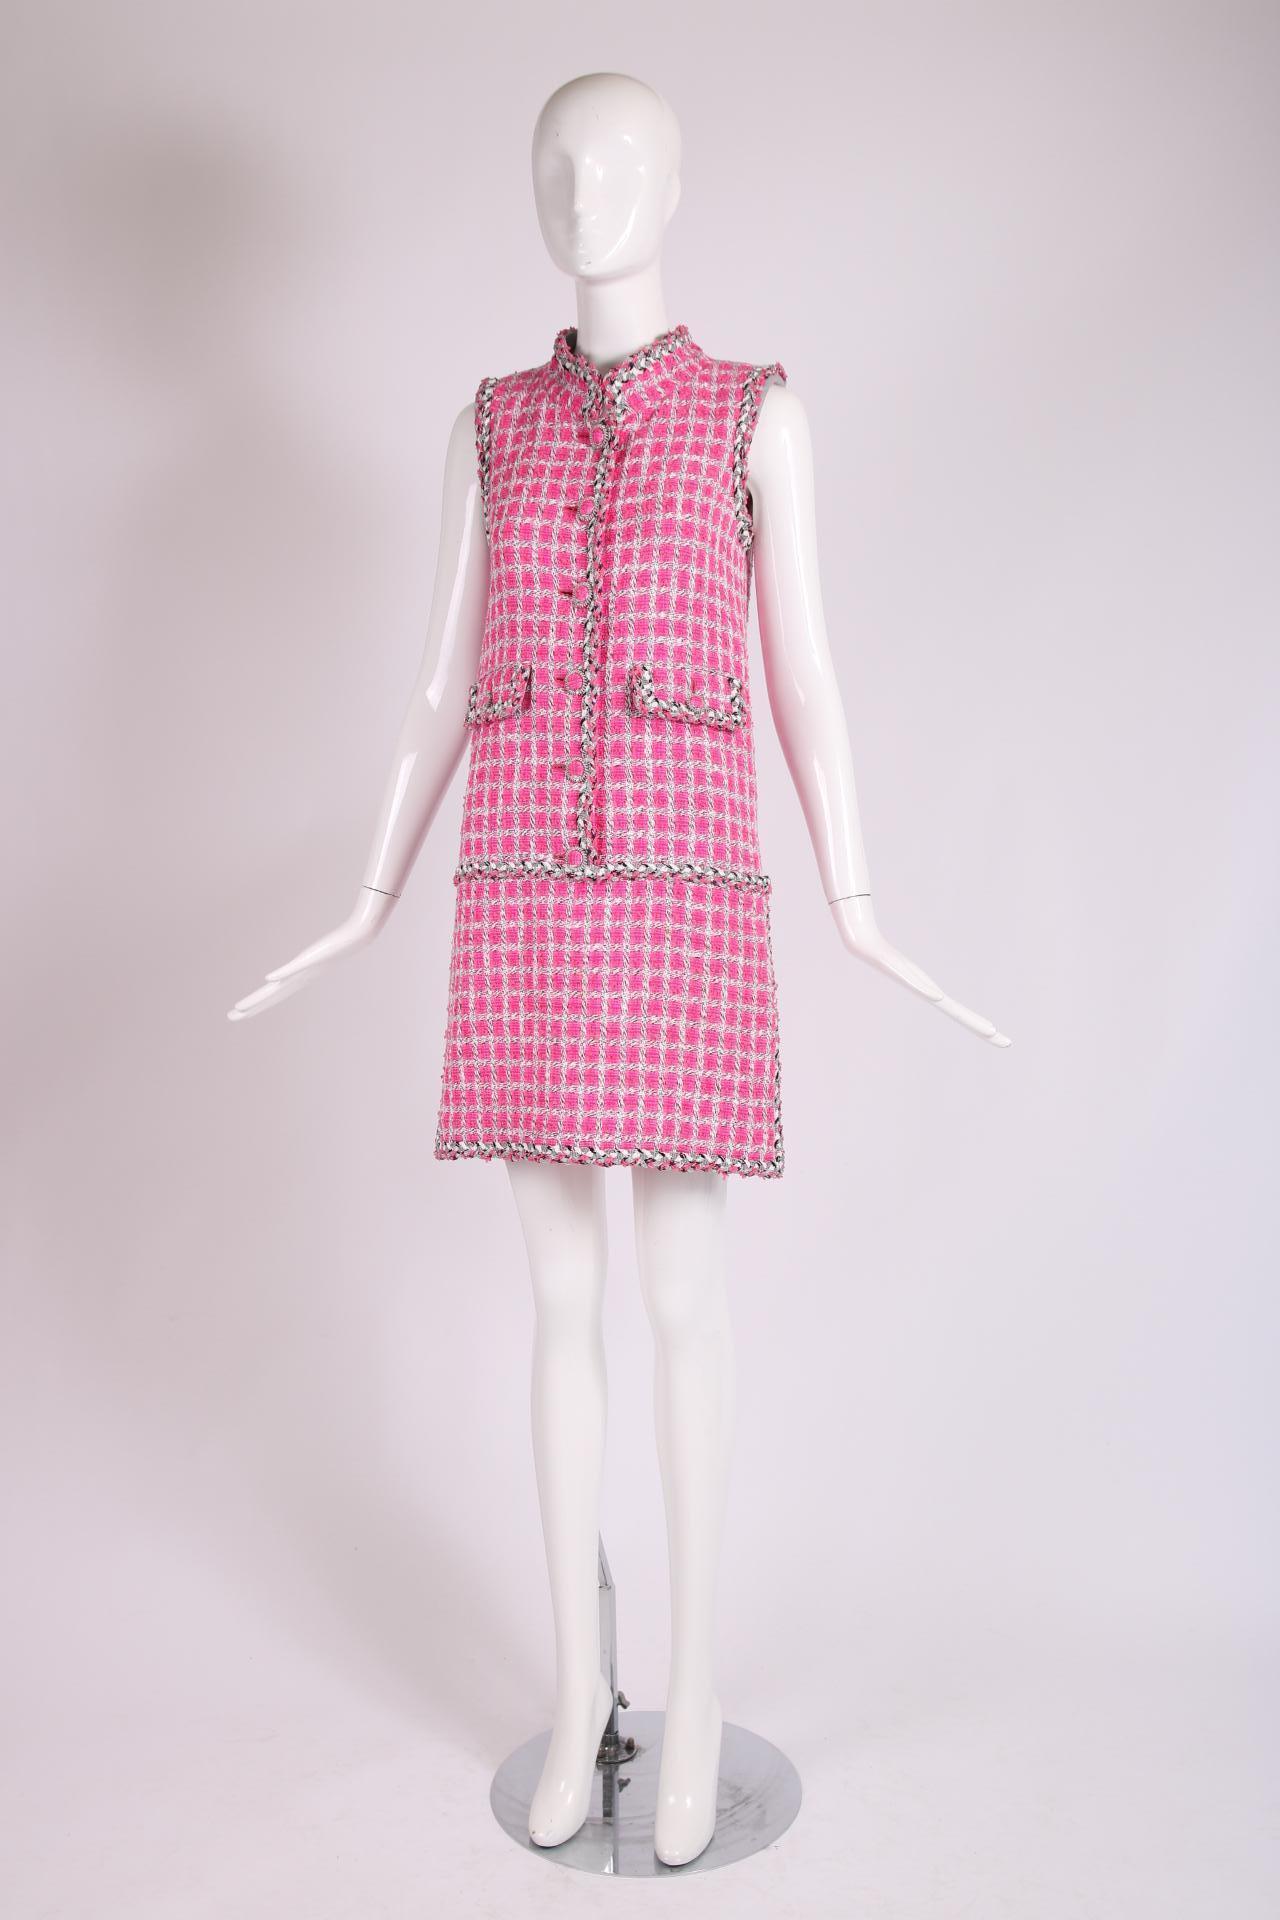 Chanel ca. 2014 shocking pink sleeveless tweed mini dress with fabric-covered frontal buttons closures, two frontal pockets, side zippers at skirt hem, hidden side pockets and trim made of multicolored and metallic silver 